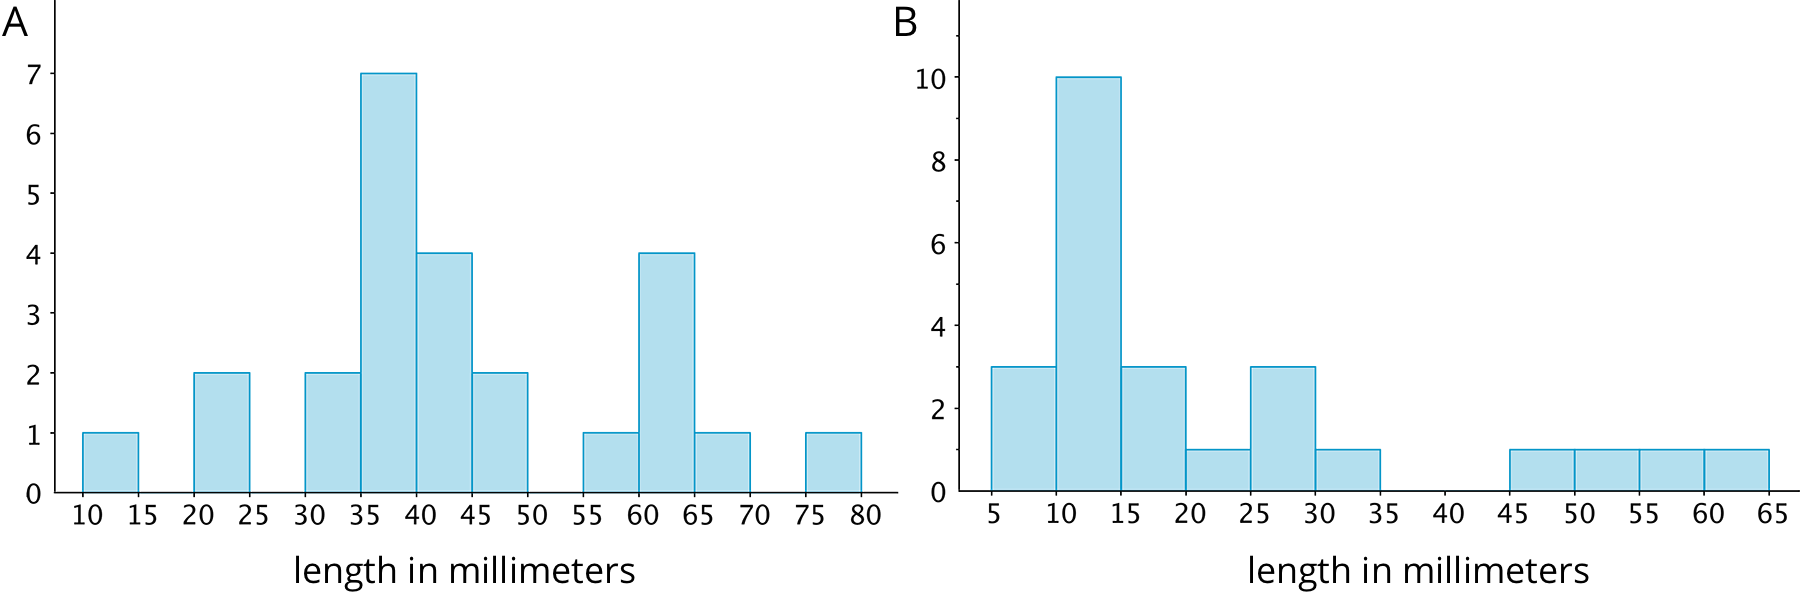 Two histograms for “length in millimeters” labeled “A” and “B.” Histogram “A:” horizontal axis is labeled “length in millimeters” with the numbers 10 through 80, in increments of 5, indicated.  The vertical axis has the numbers 0 through 7 indicated.  The data are: 10 up to 15 millimeters, 1; 15 up to 20 millimeters, 0; 20 up to 25 millimeters, 2; 25 up to 30 millimeters, 0; 30 up to 35 millimeters, 2; 35 up to 40 millimeters, 7; 40 up to 45 millimeters, 4; 45 up to 50 millimeters, 2; 50 up to 55 millimeters, 0; 55 up to 60 millimeters, 1; 60 up to 65 millimeters, 4; 65 up to 70 millimeters, 1; 70 up to 75 millimeters, 0; 75 up to 80 millimeters, 1. Histogram “B:” horizontal axis is labeled “length in millimeters,” the numbers 5 through 65, in increments of 5, are indicated.  The vertical axis has the numbers 0 through 10 indicated, with tick marks midway between.  The data are:  5 up to 10 millimeters, 3; 10 up to 15 millimeters, 10; 15 up to 20 millimeters, 3; 20 up to 25 millimeters, 1; 25 up to 30 millimeters, 3; 30 up to 35 millimeters, 1; 35 up to 40 millimeters, 0; 40 up to 45 millimeters, 0; 45 up to 50 millimeters, 1; 50 up to 55 millimeters, 1; 55 up to 60 millimeters, 1; 60 up to 65 millimeters, 1.